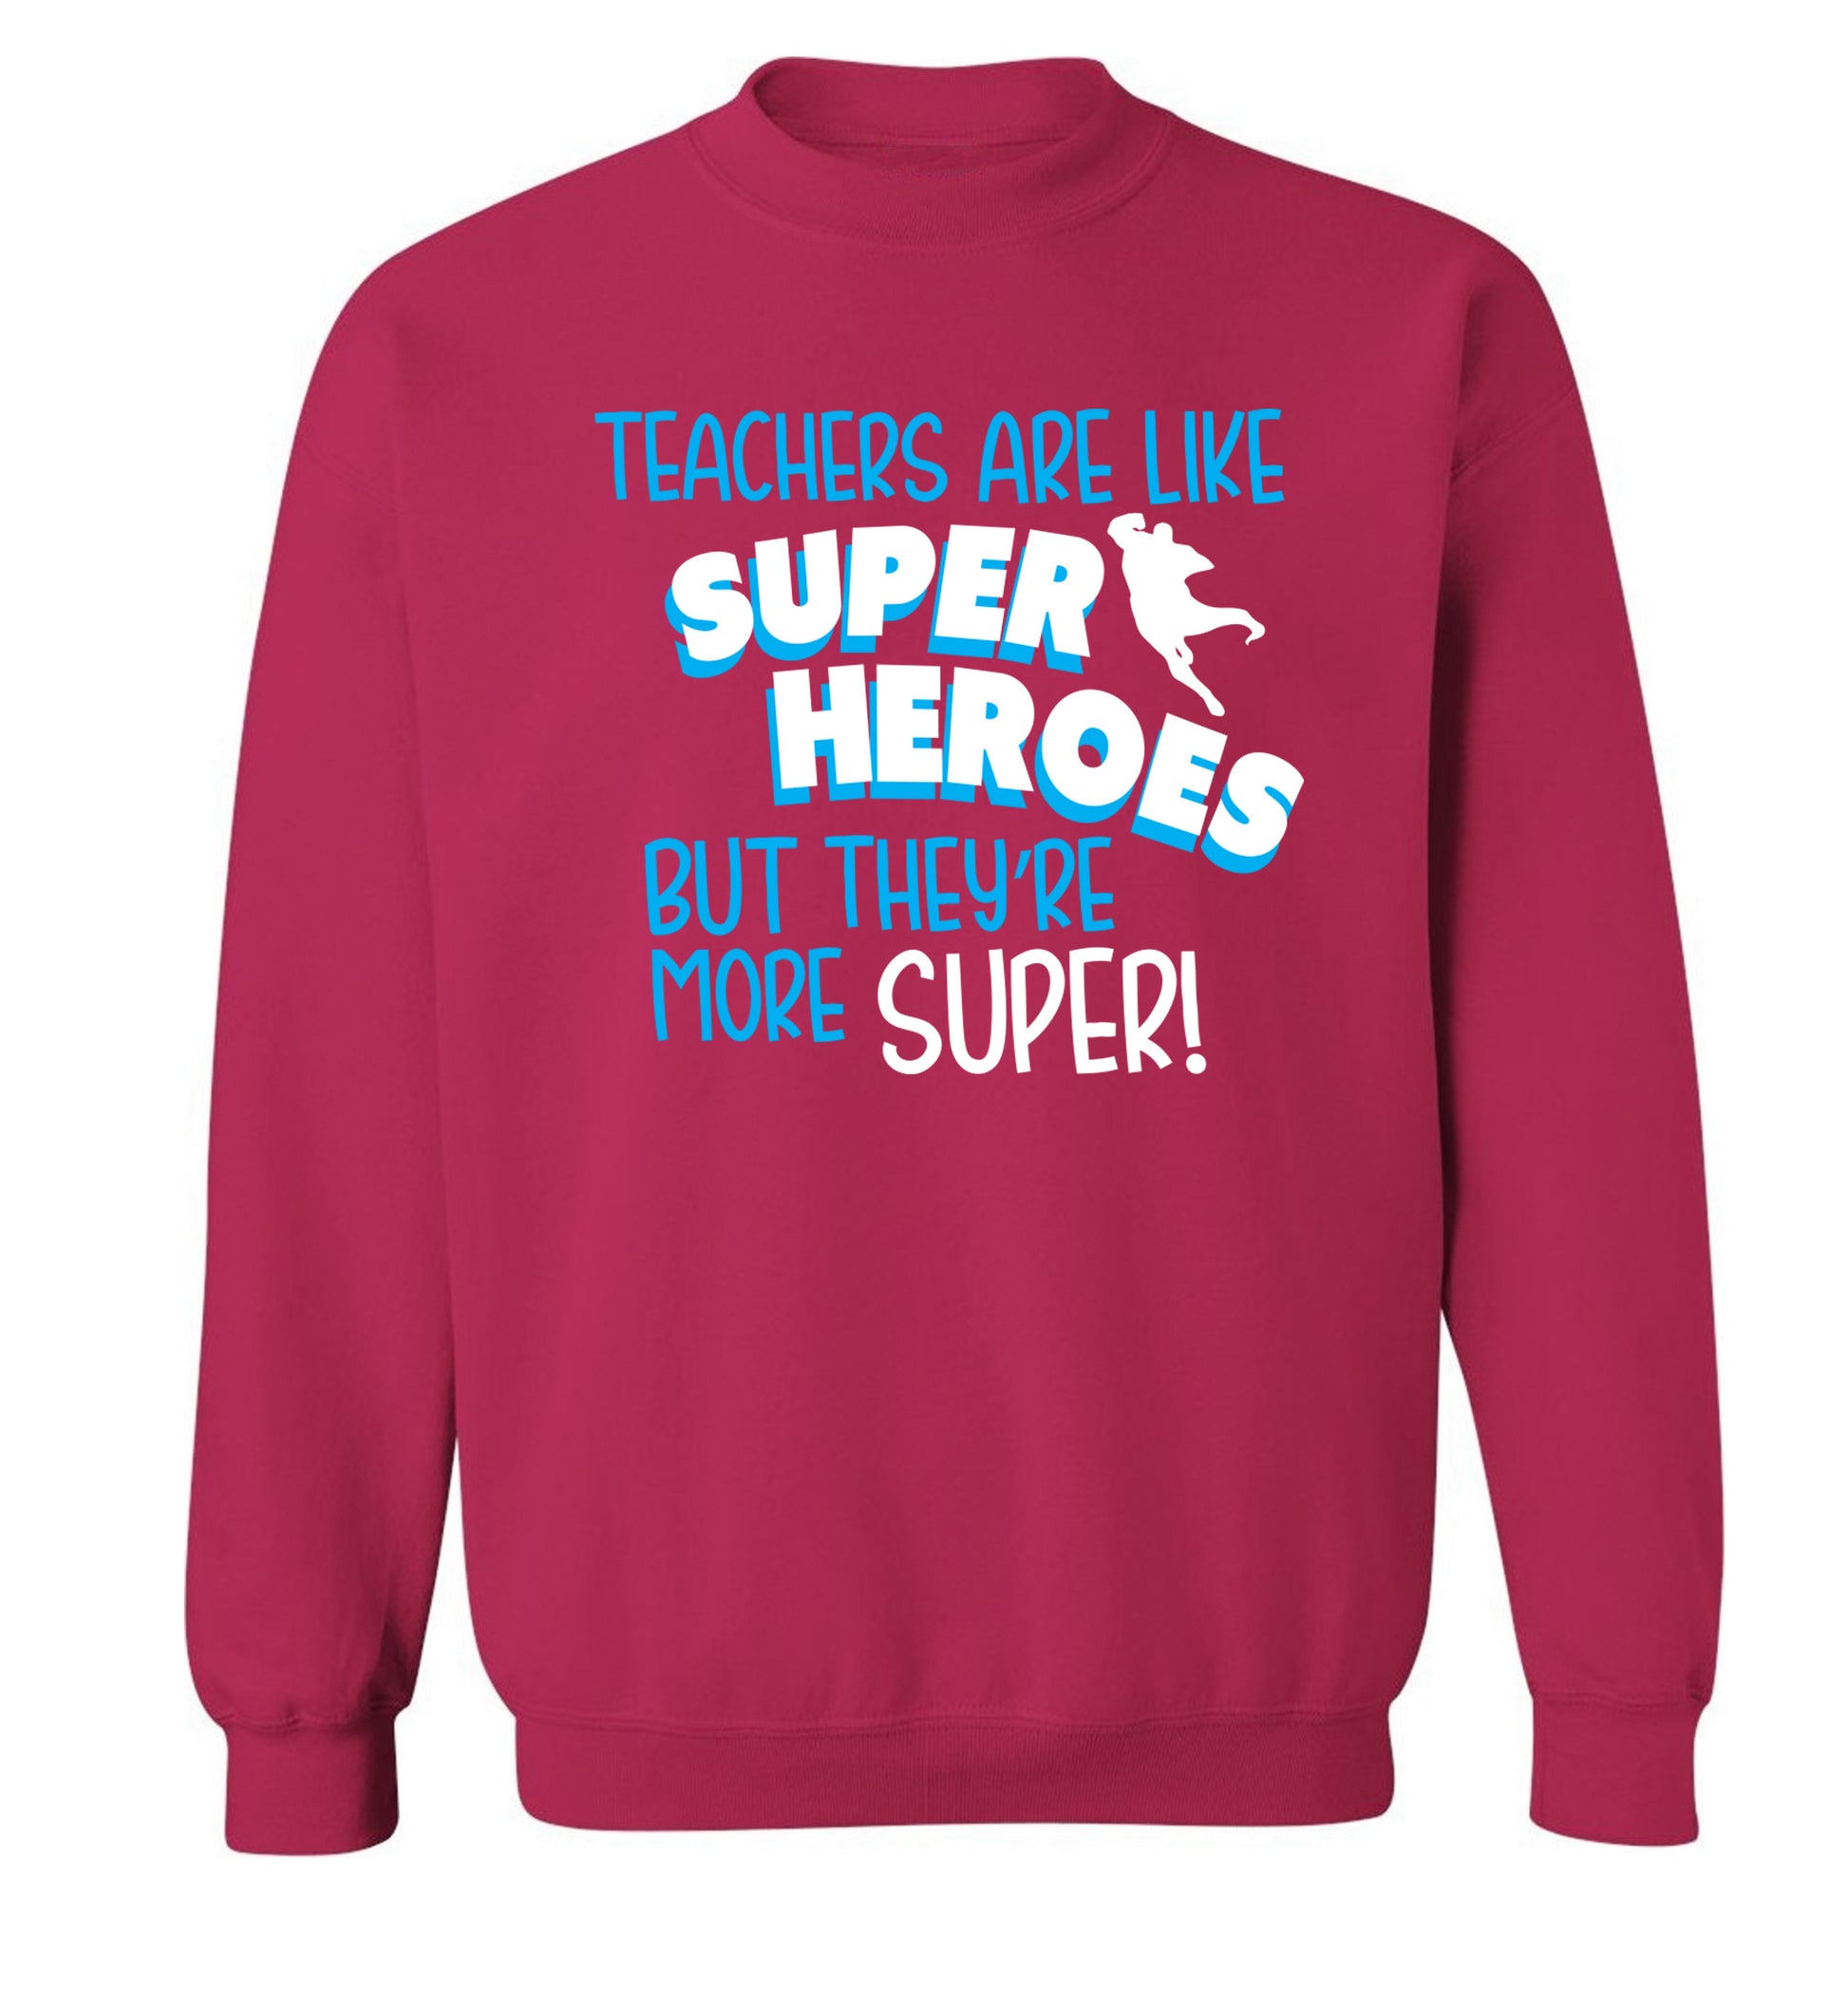 Teachers are like superheros but they're more super Adult's unisex pink Sweater 2XL